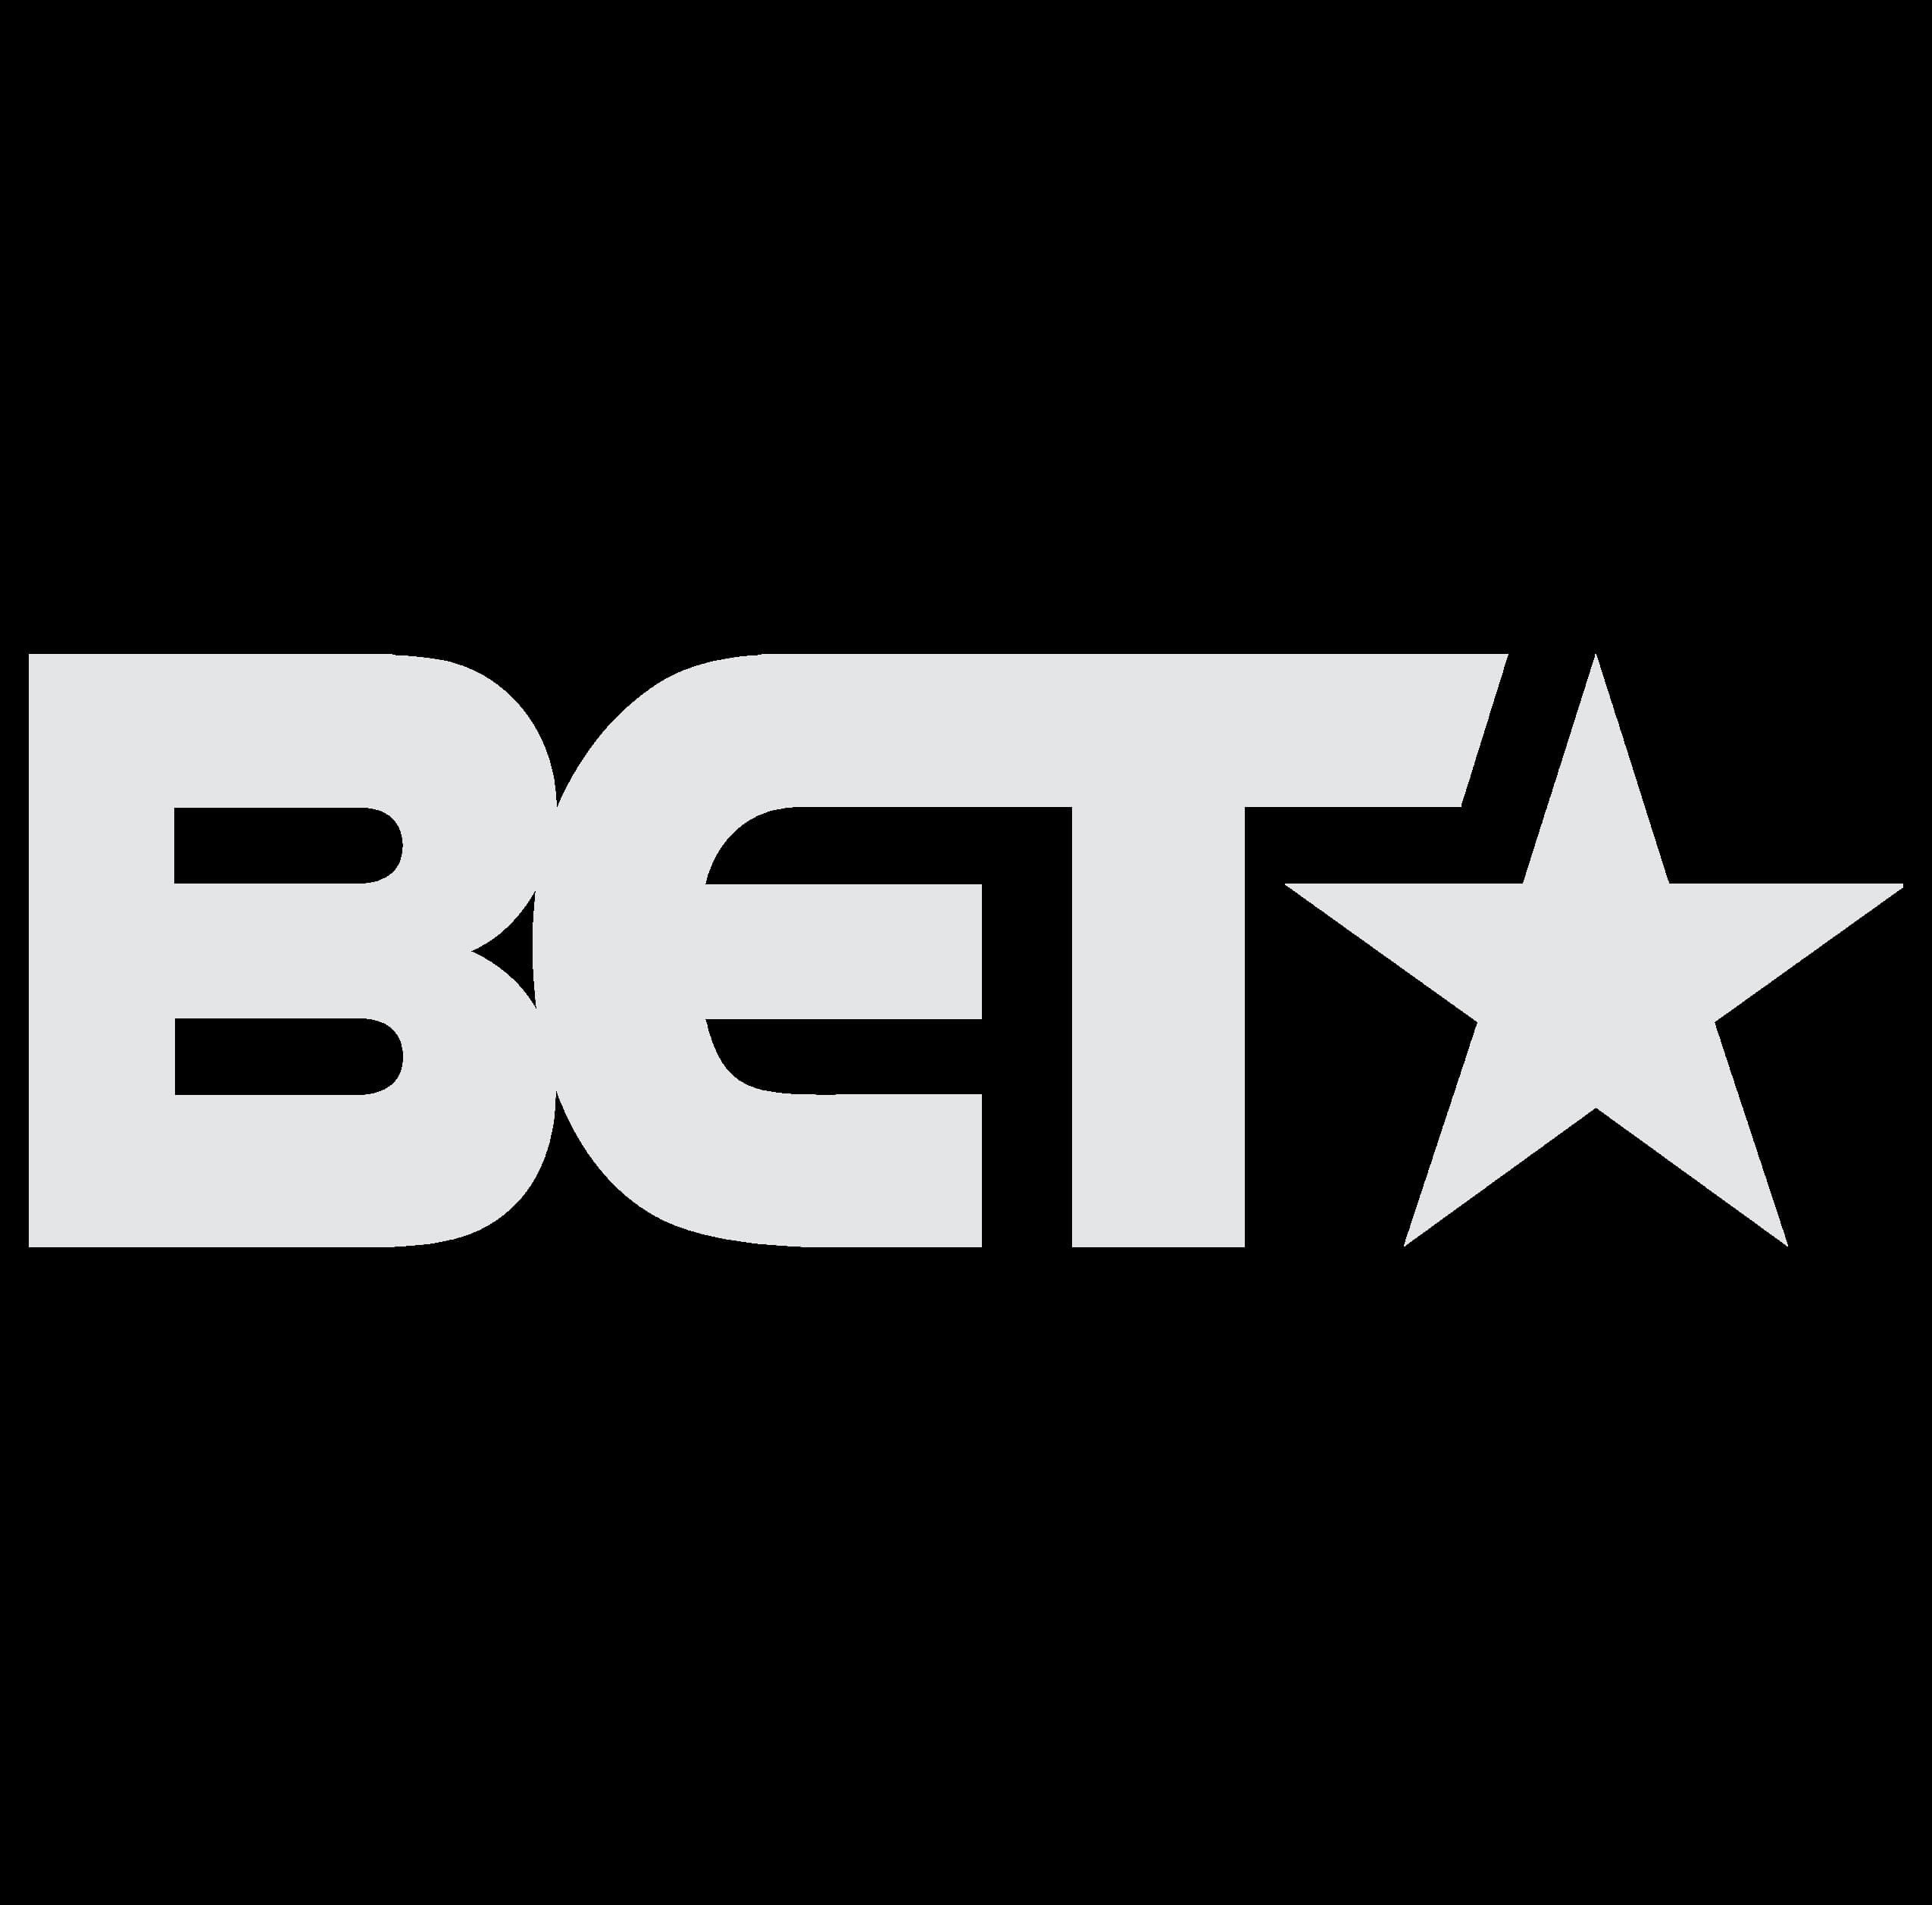 BET Live Stream: How to Watch BET Online for Free